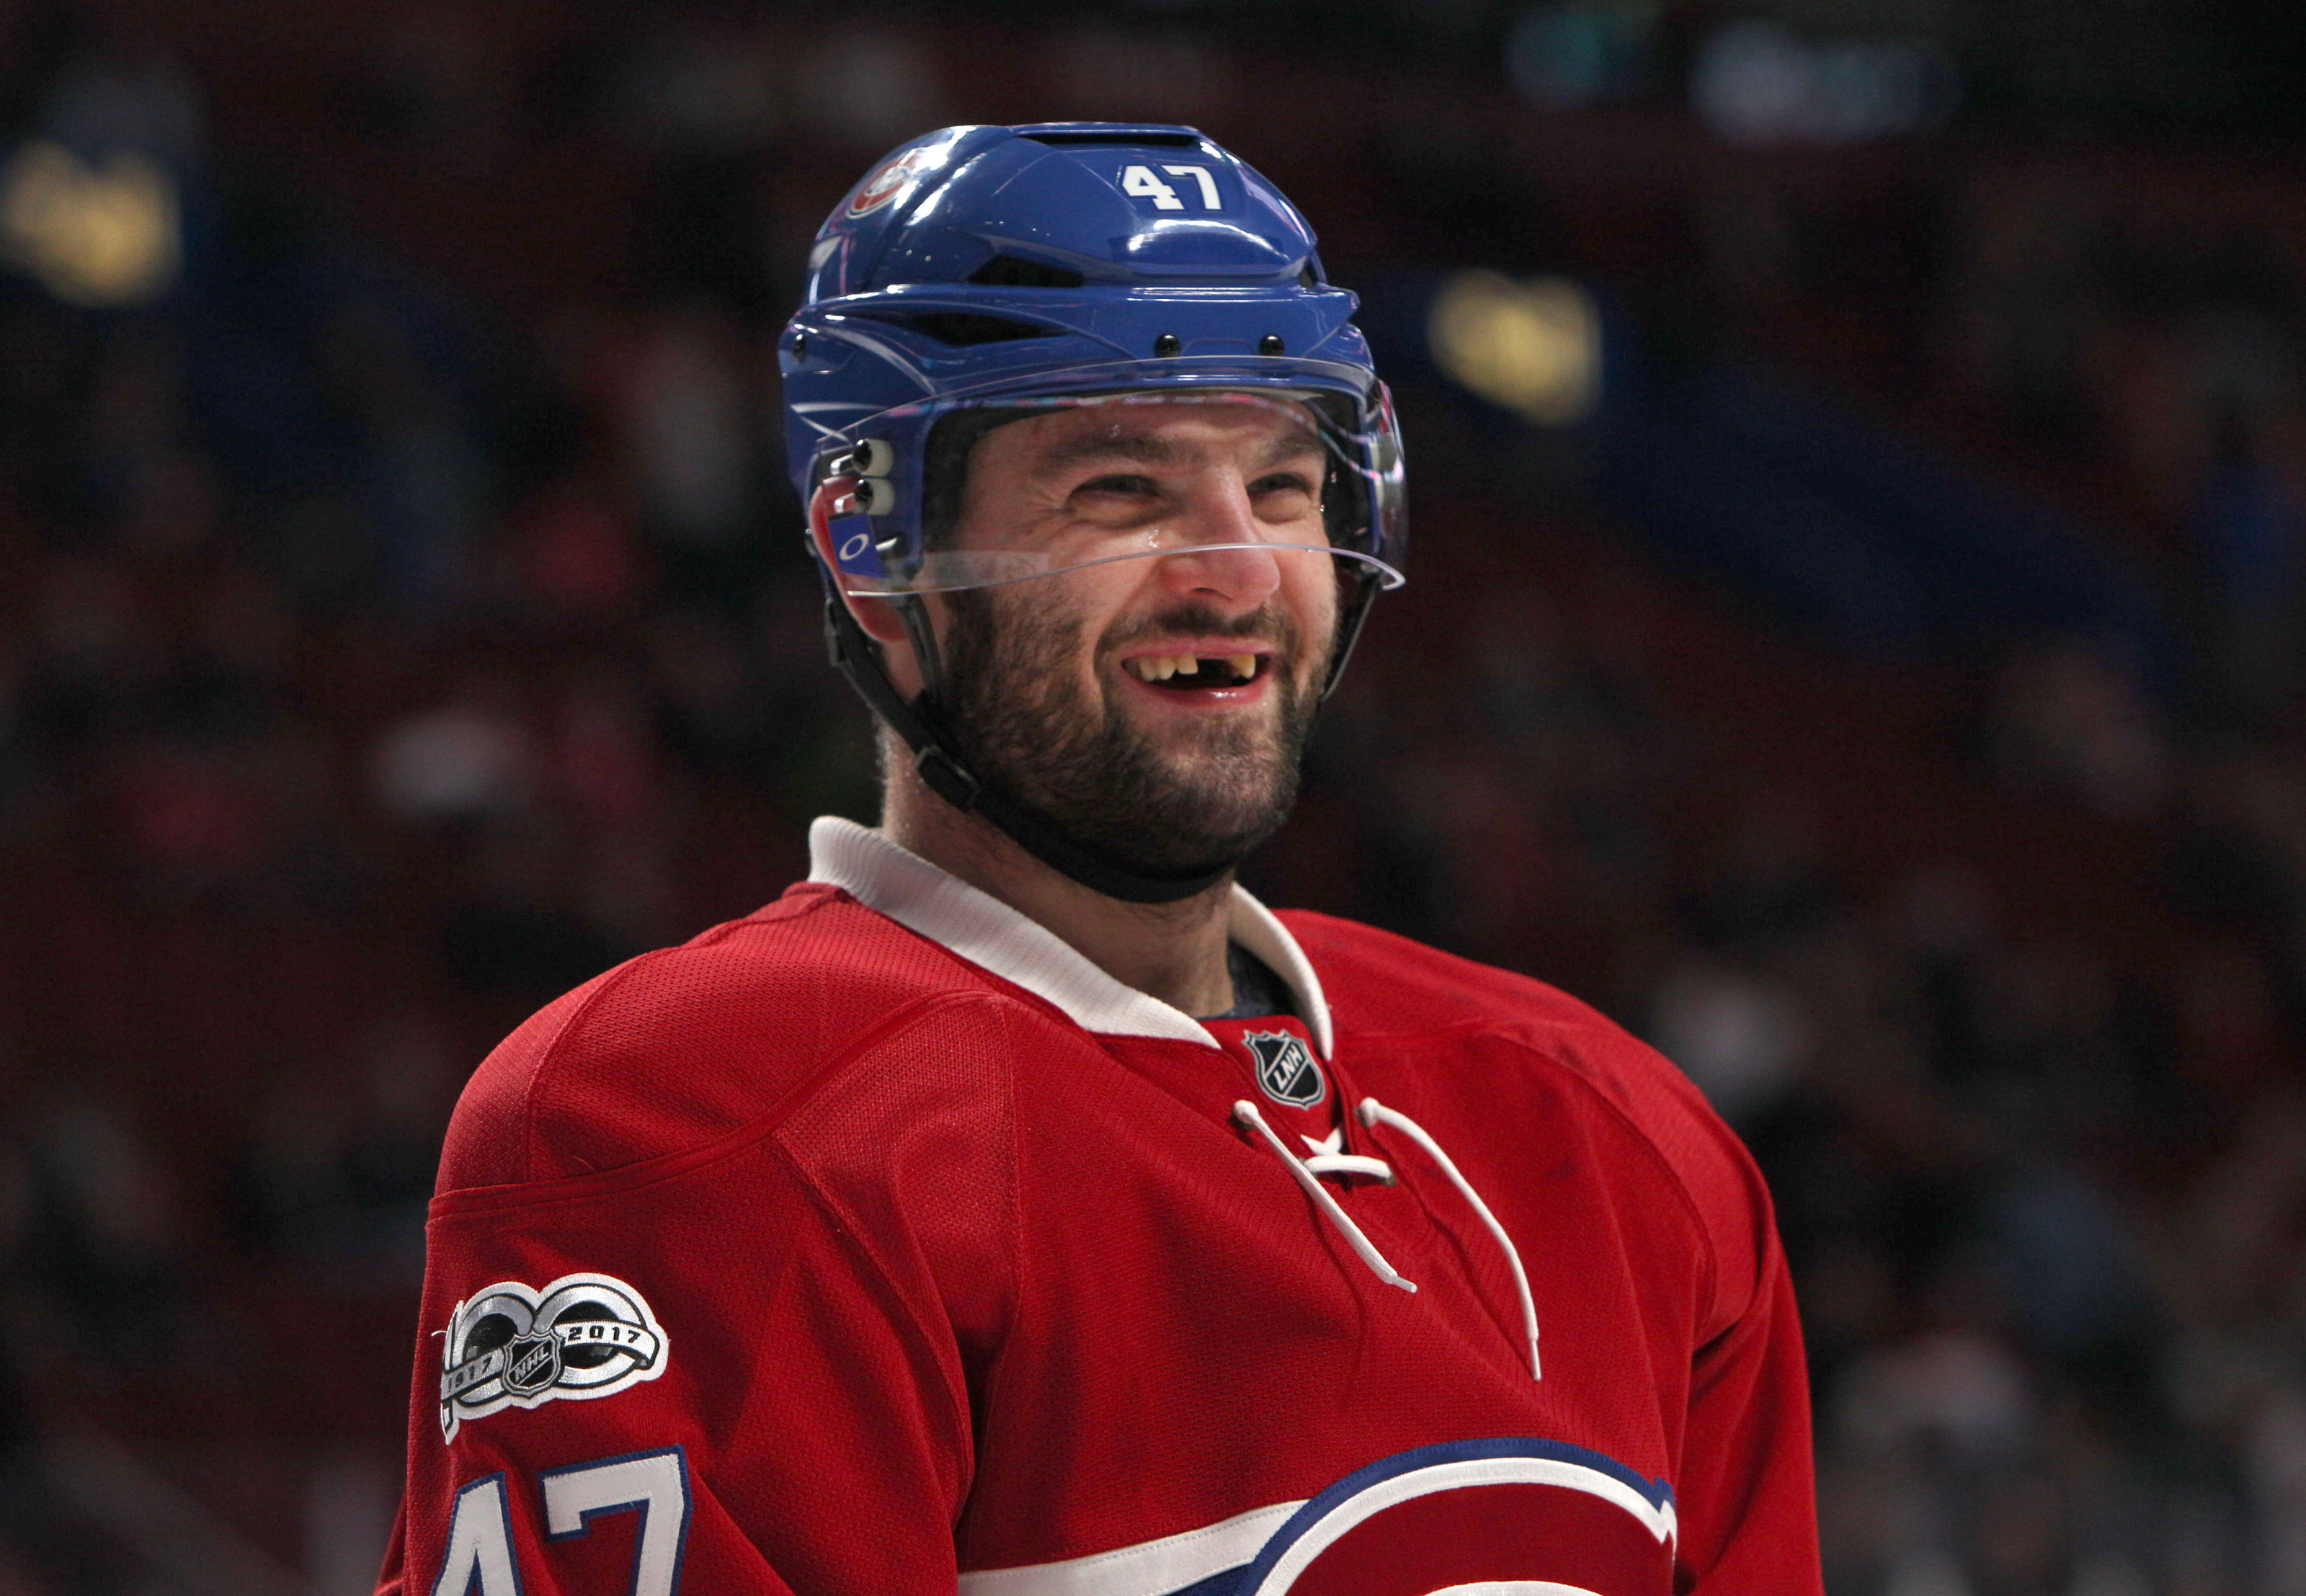 Alexander Radulov, Once a Disrupter, Grows Into a Leader for the Canadiens  - The New York Times